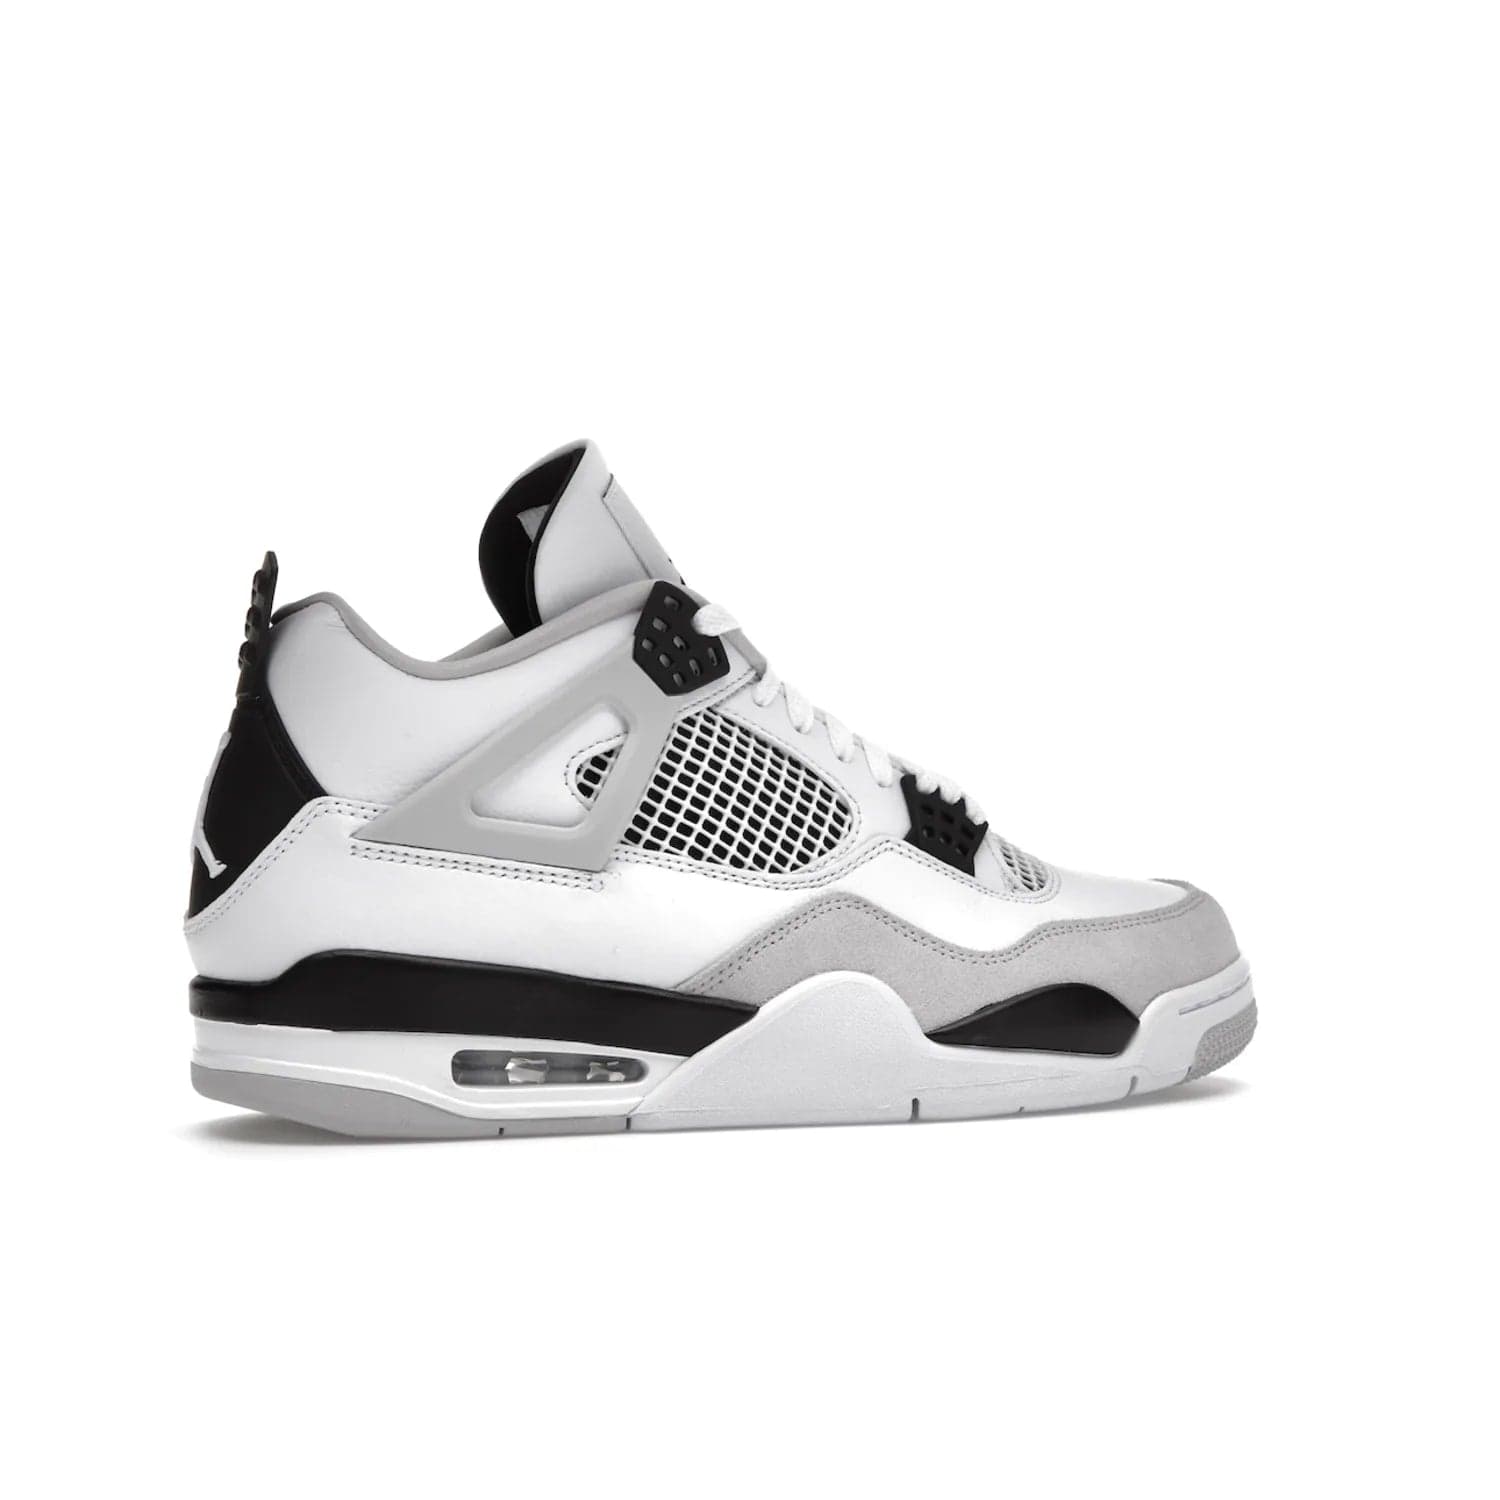 Jordan 4 Retro Military Black - Image 35 - Only at www.BallersClubKickz.com - Updated Air Jordan 4 style with a white/black/light grey sole and visible Air unit. Released in May 2022, offering timeless classic style and comfort.